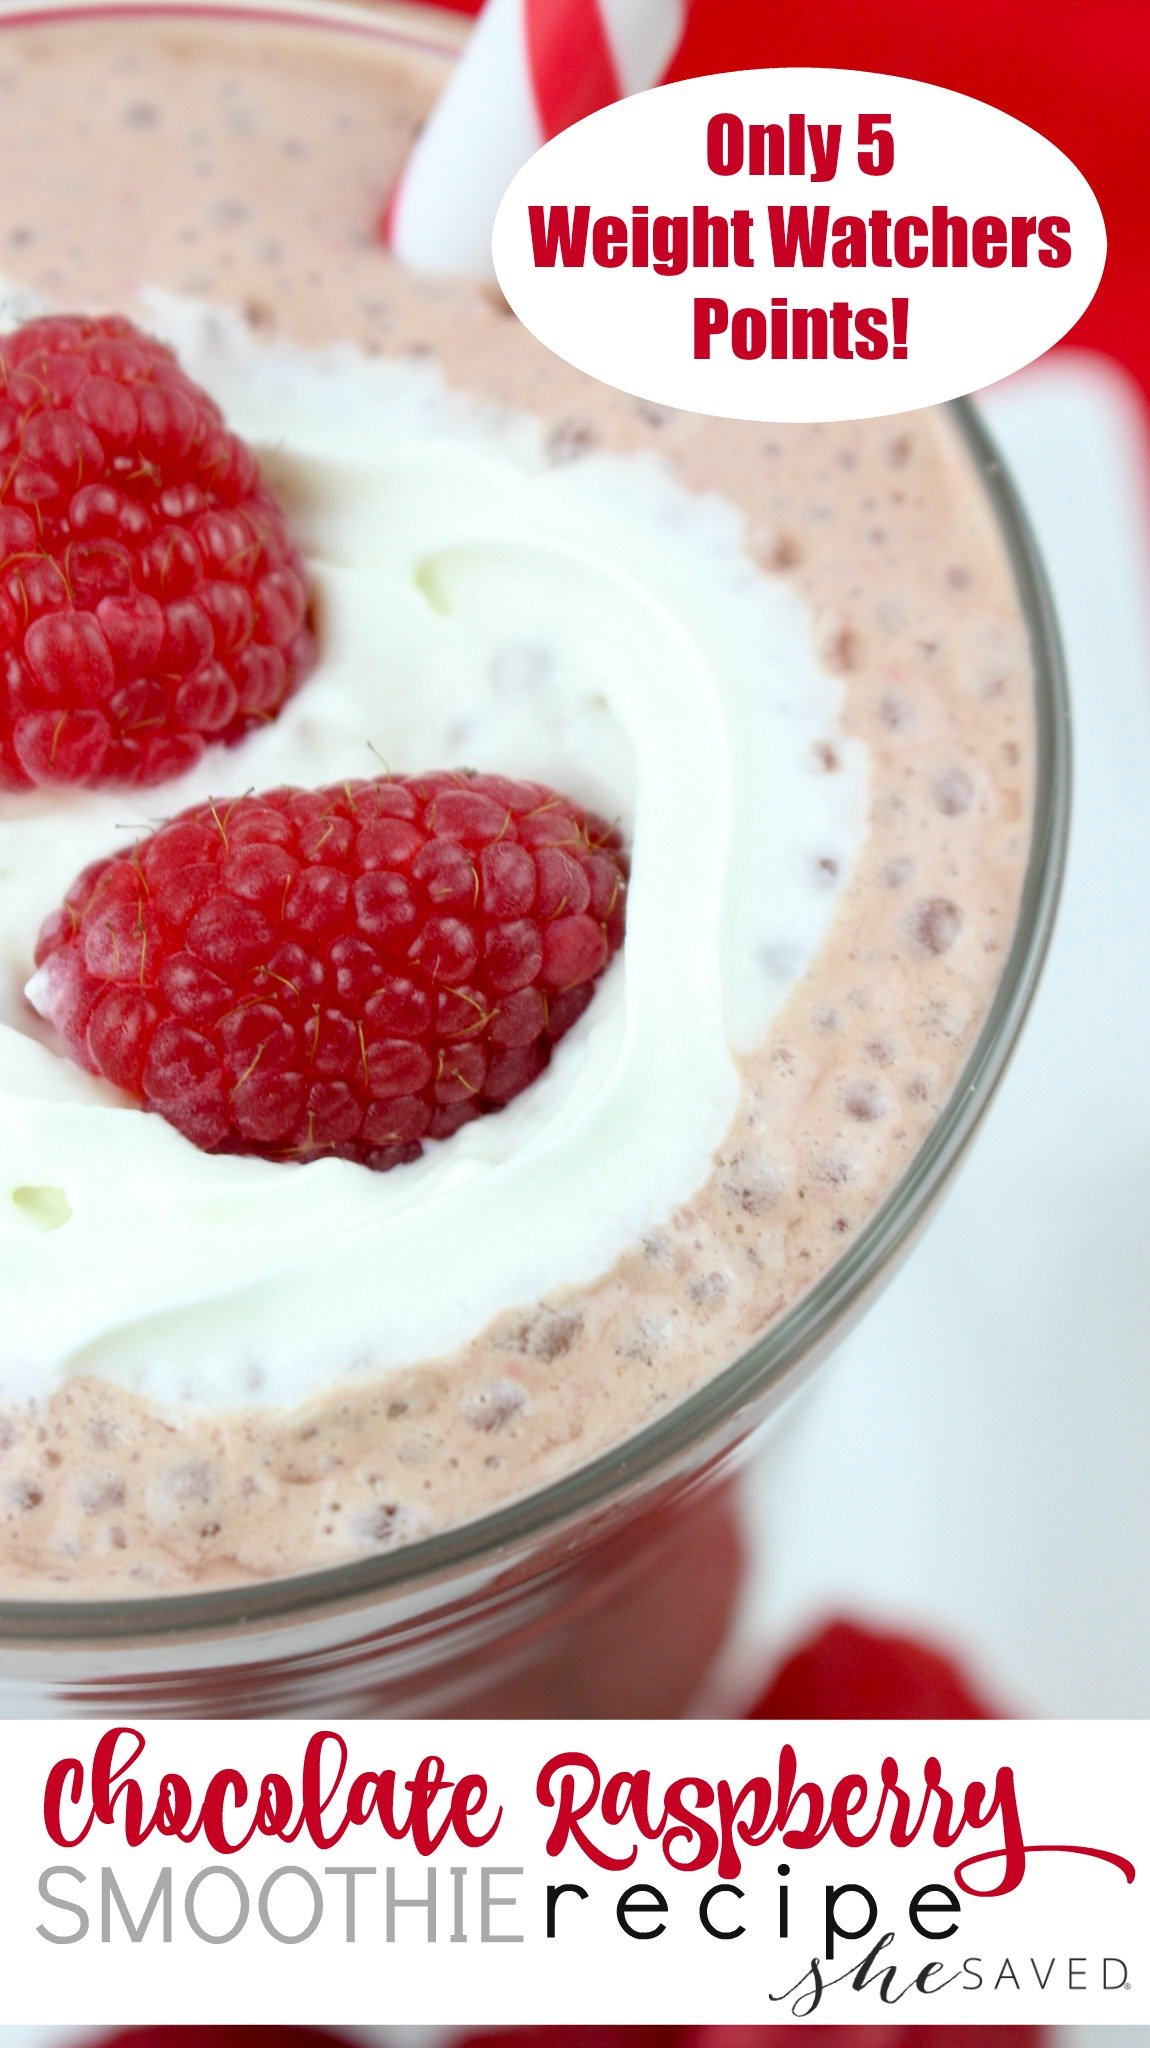 This Chocolate Raspberry Smoothie Recipe is a perfect breakfast option for your busy day and even better, it's only 5 Weight Watchers points!